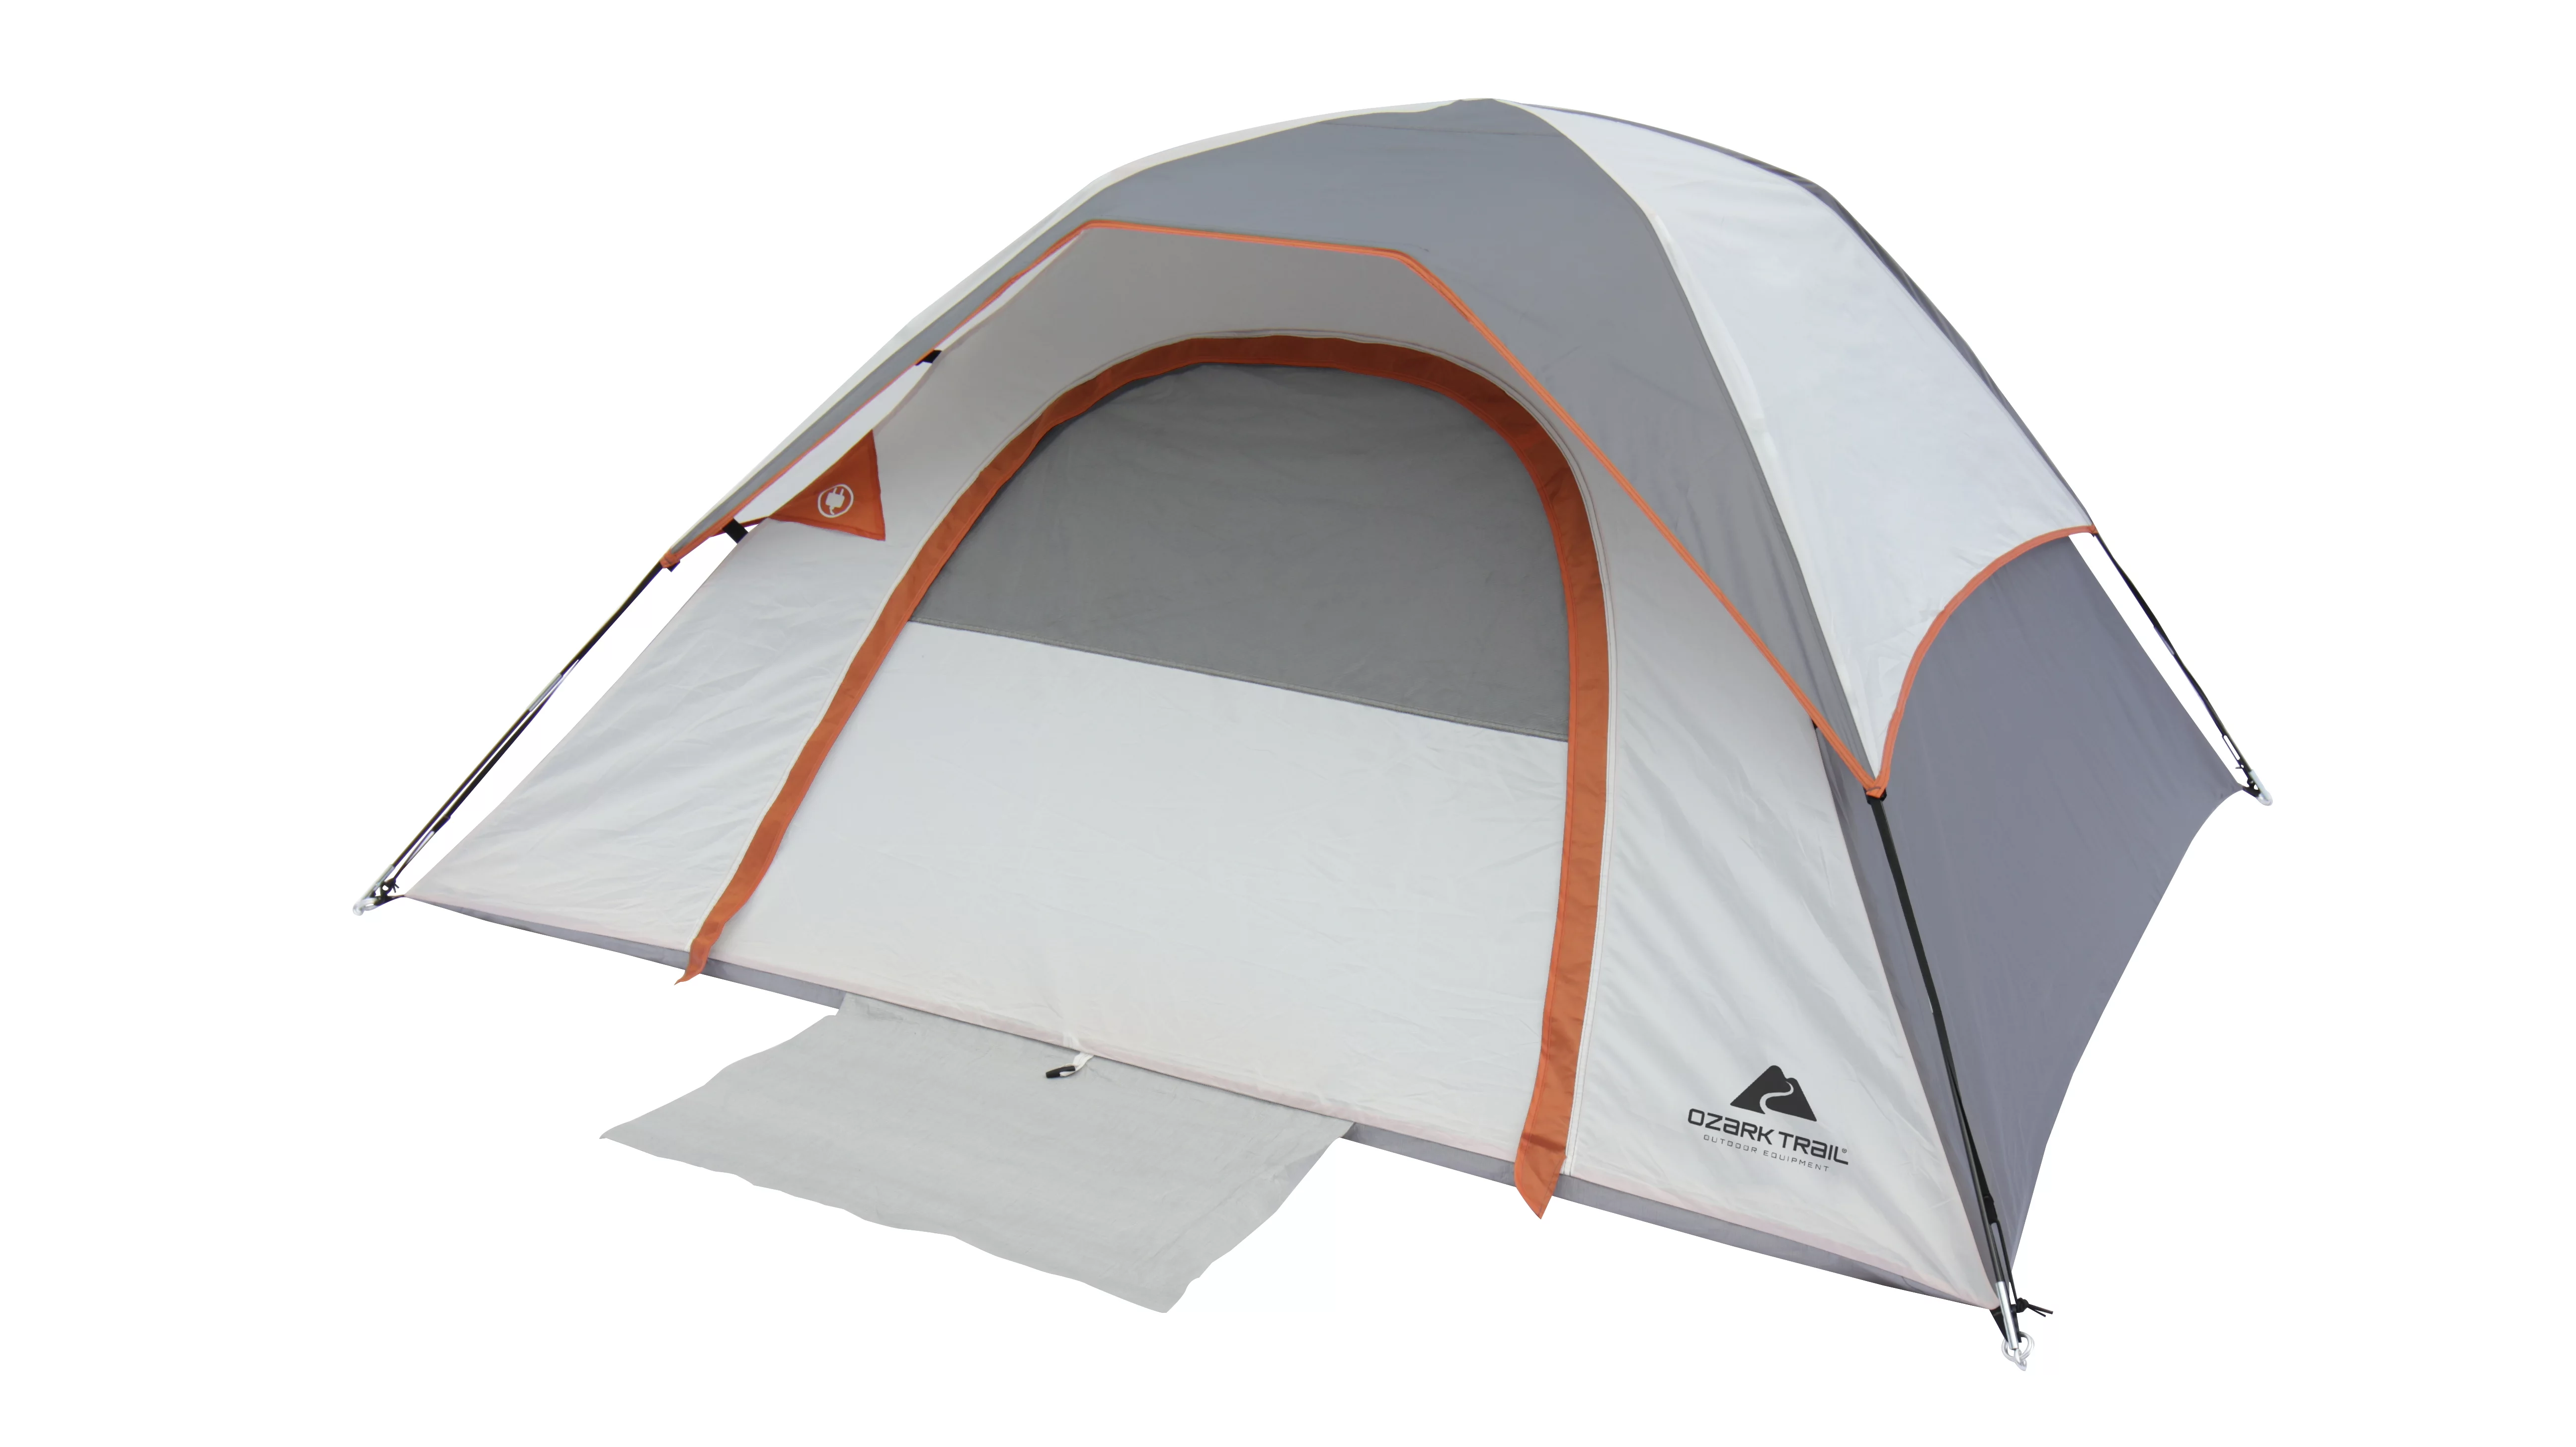 Ozark Trail 3 Person Camping Dome Tent, 5.64 lbs